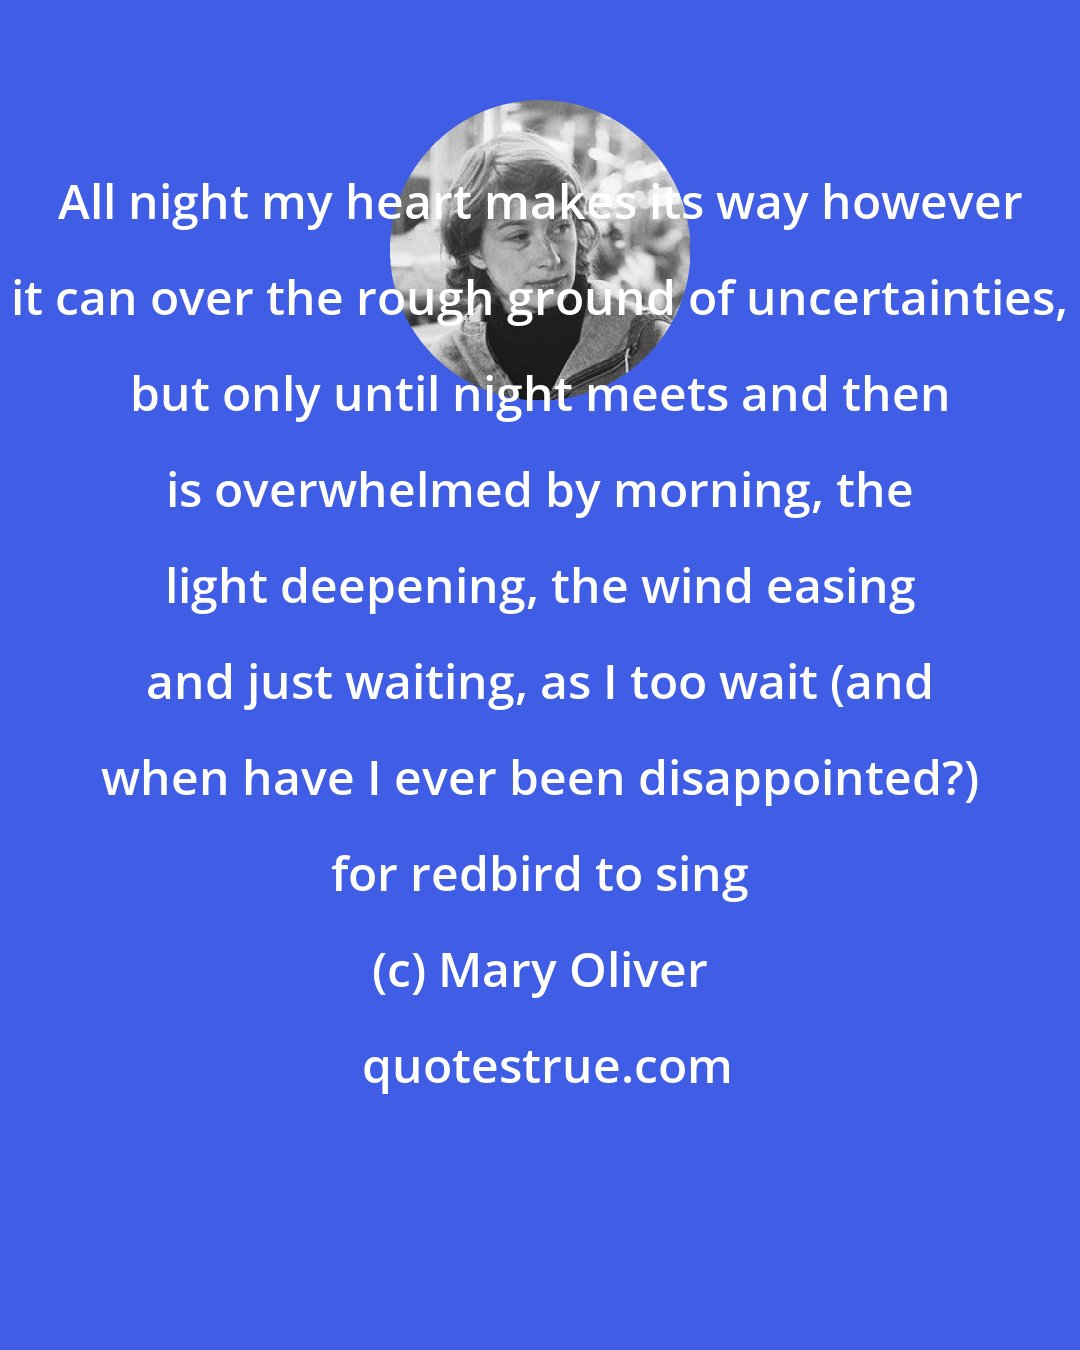 Mary Oliver: All night my heart makes its way however it can over the rough ground of uncertainties, but only until night meets and then is overwhelmed by morning, the light deepening, the wind easing and just waiting, as I too wait (and when have I ever been disappointed?) for redbird to sing